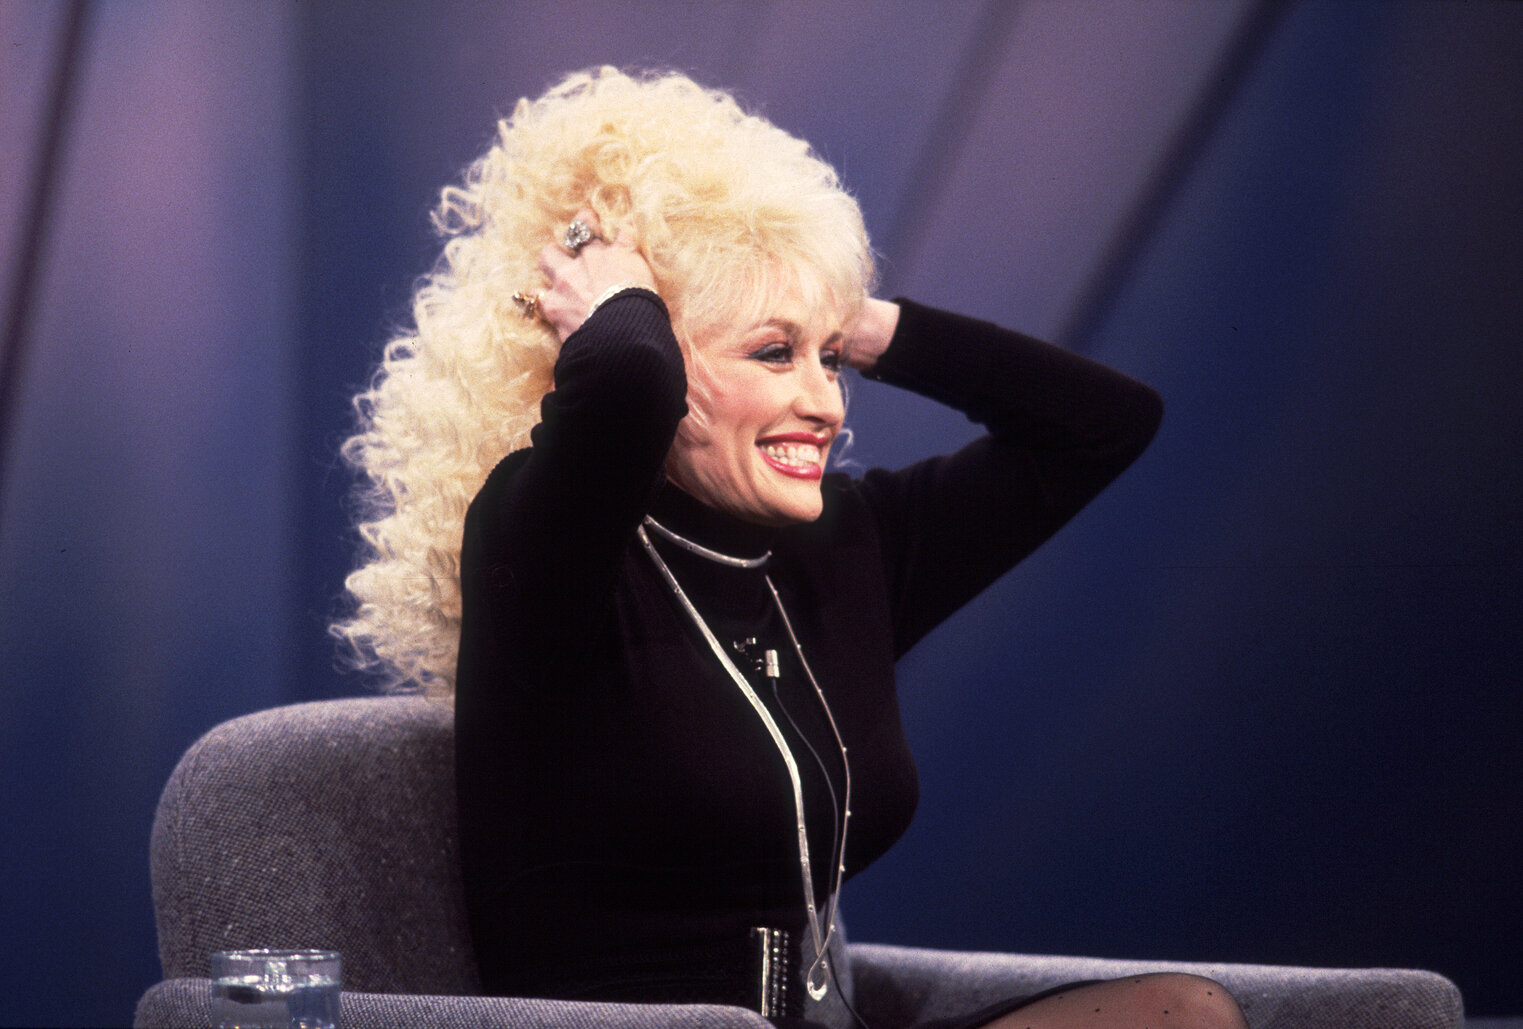 Dolly Parton sitting on the set of the Oprah Winfrey Show. Her hands are in her hair.